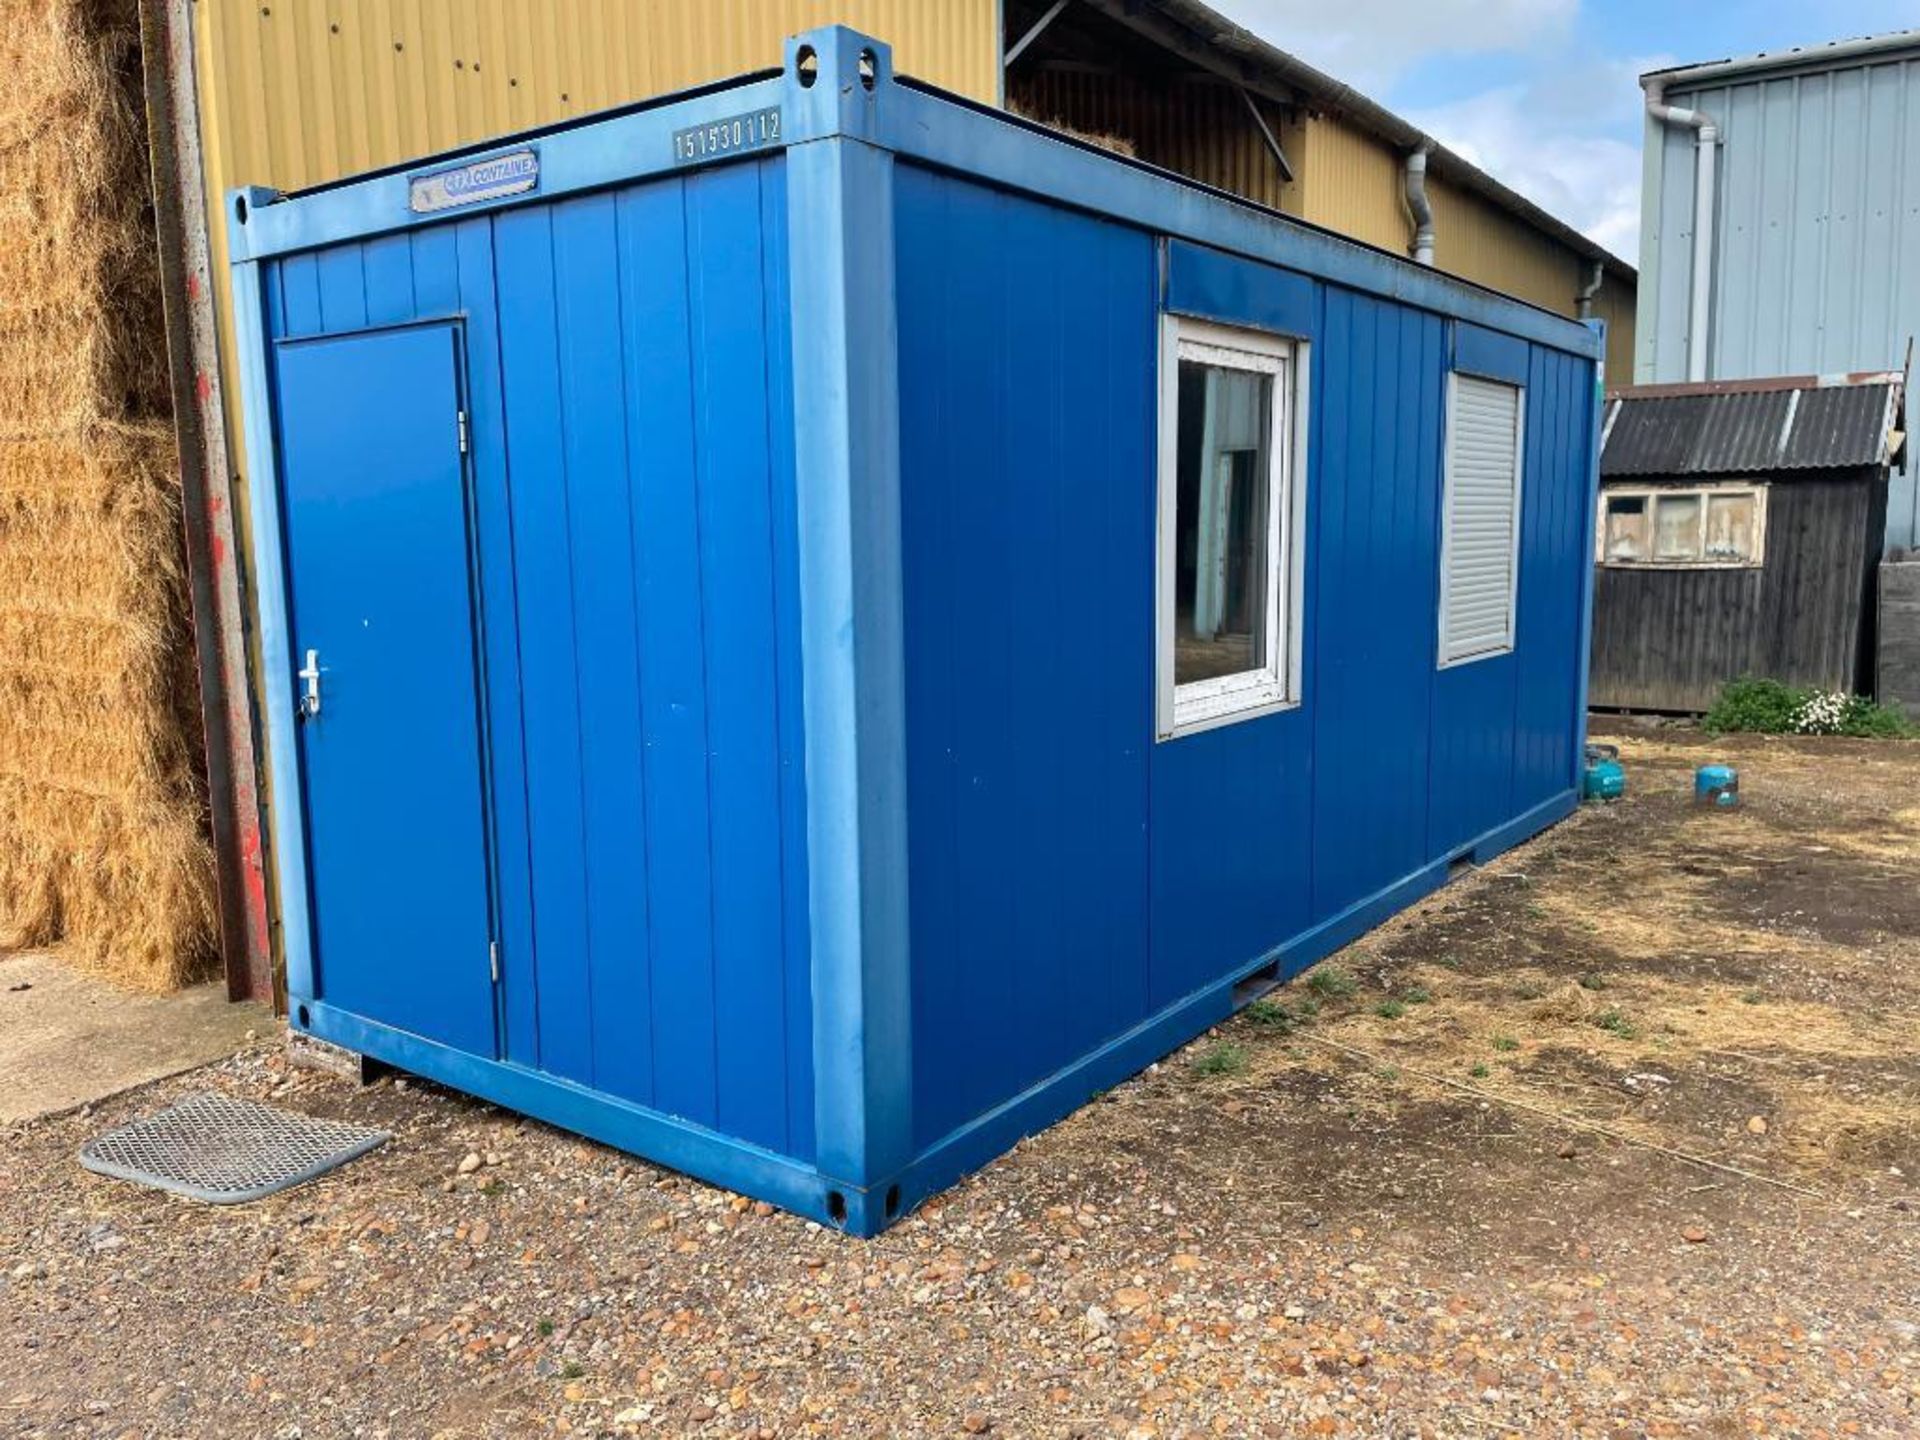 Welfare unit 20' container with electricity, office area & break room. To be sold in situ, buyer to